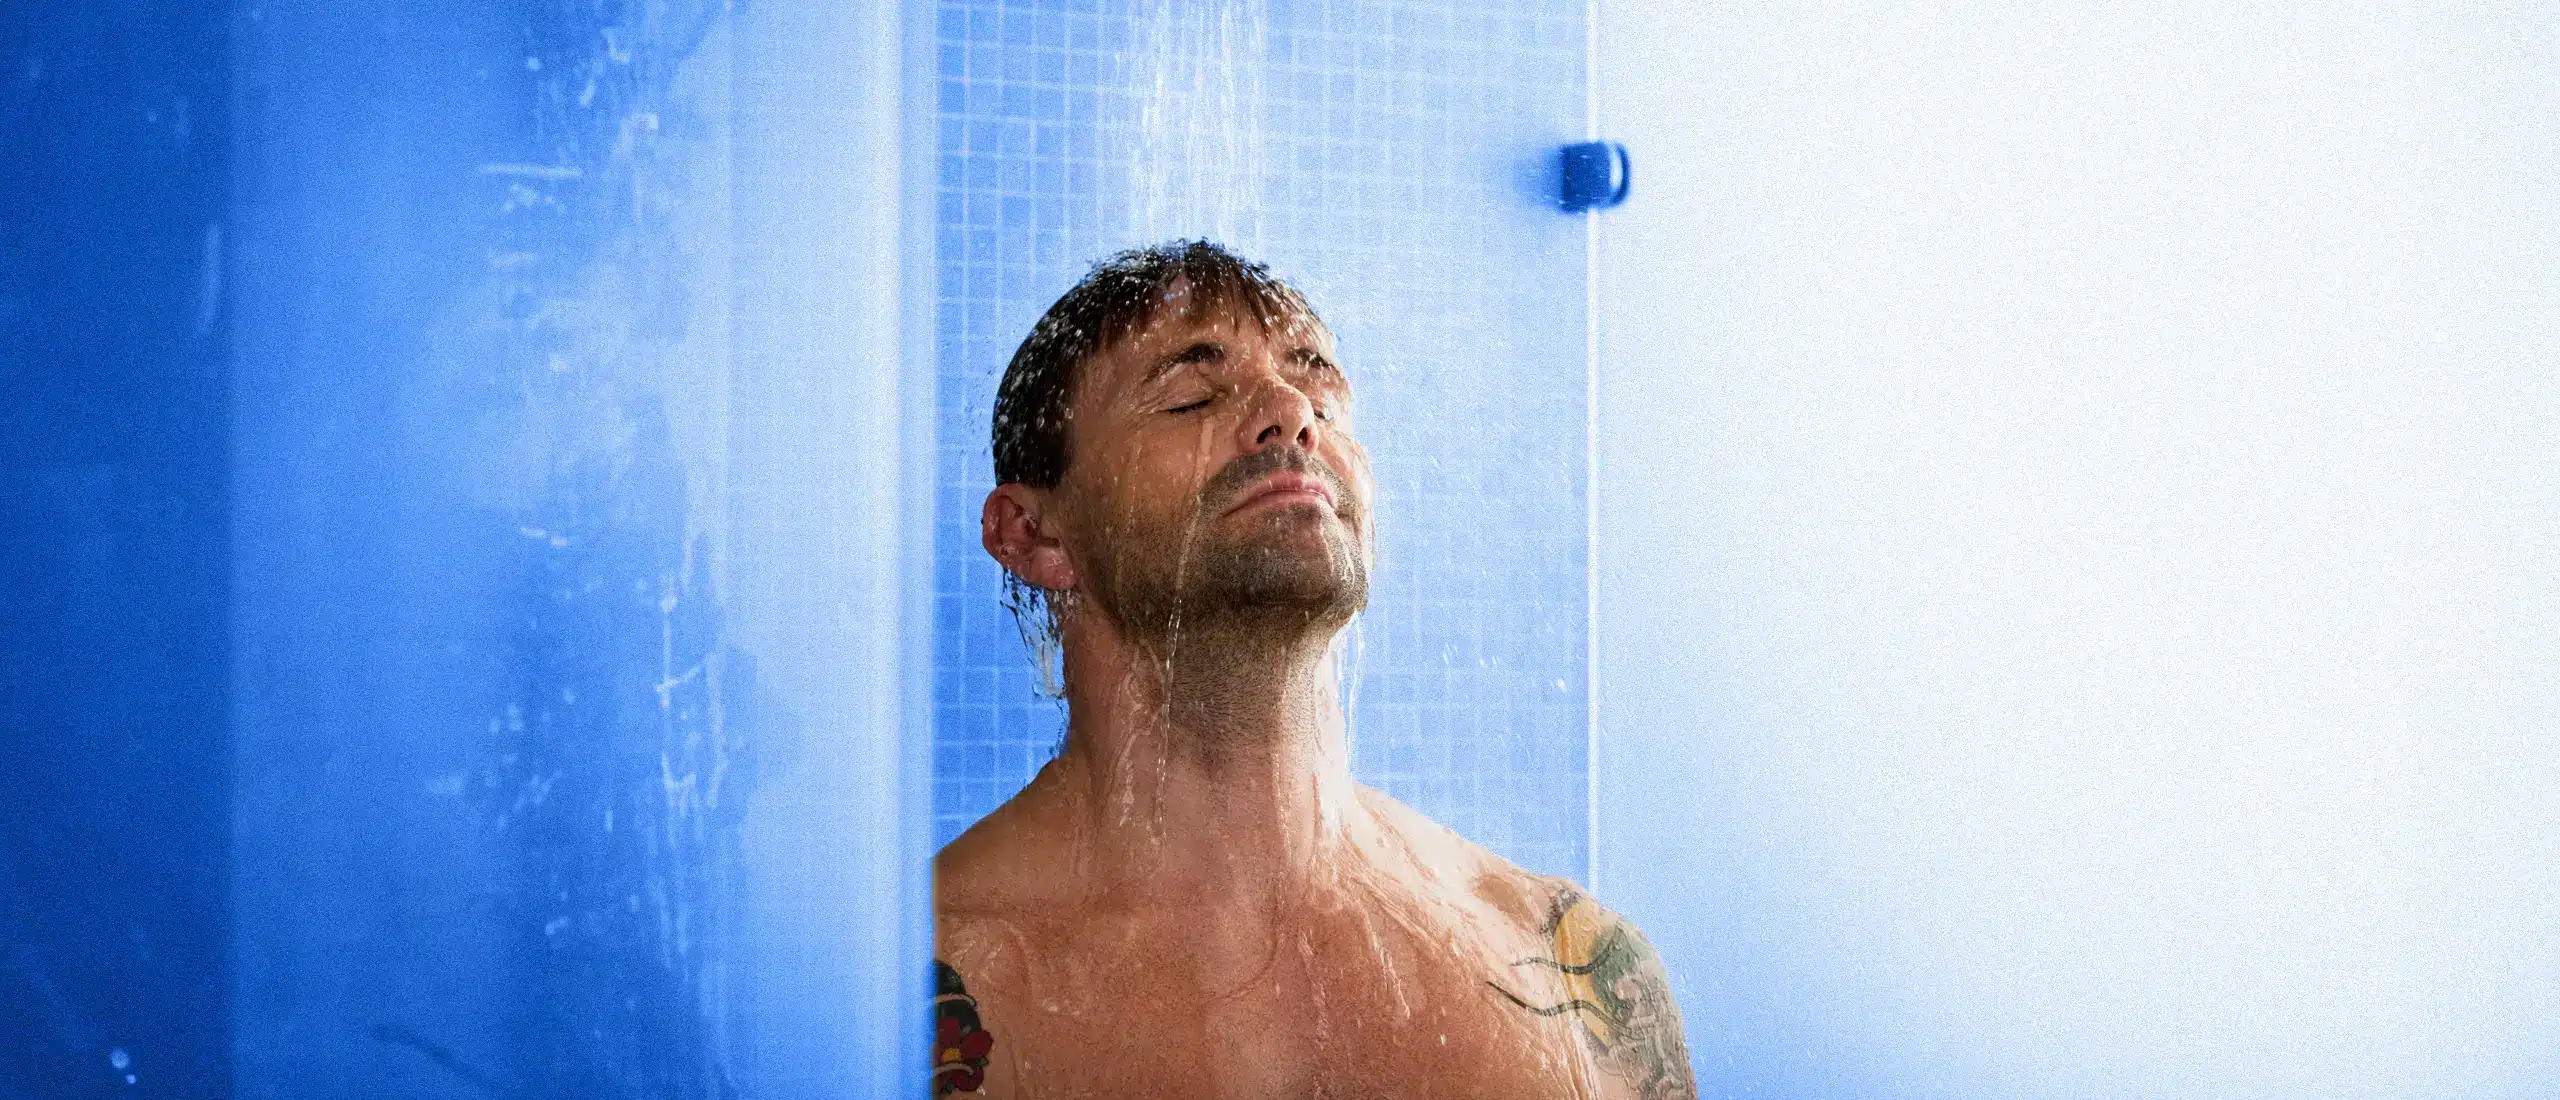 Man looking extremely relaxed for how cold his shower is.